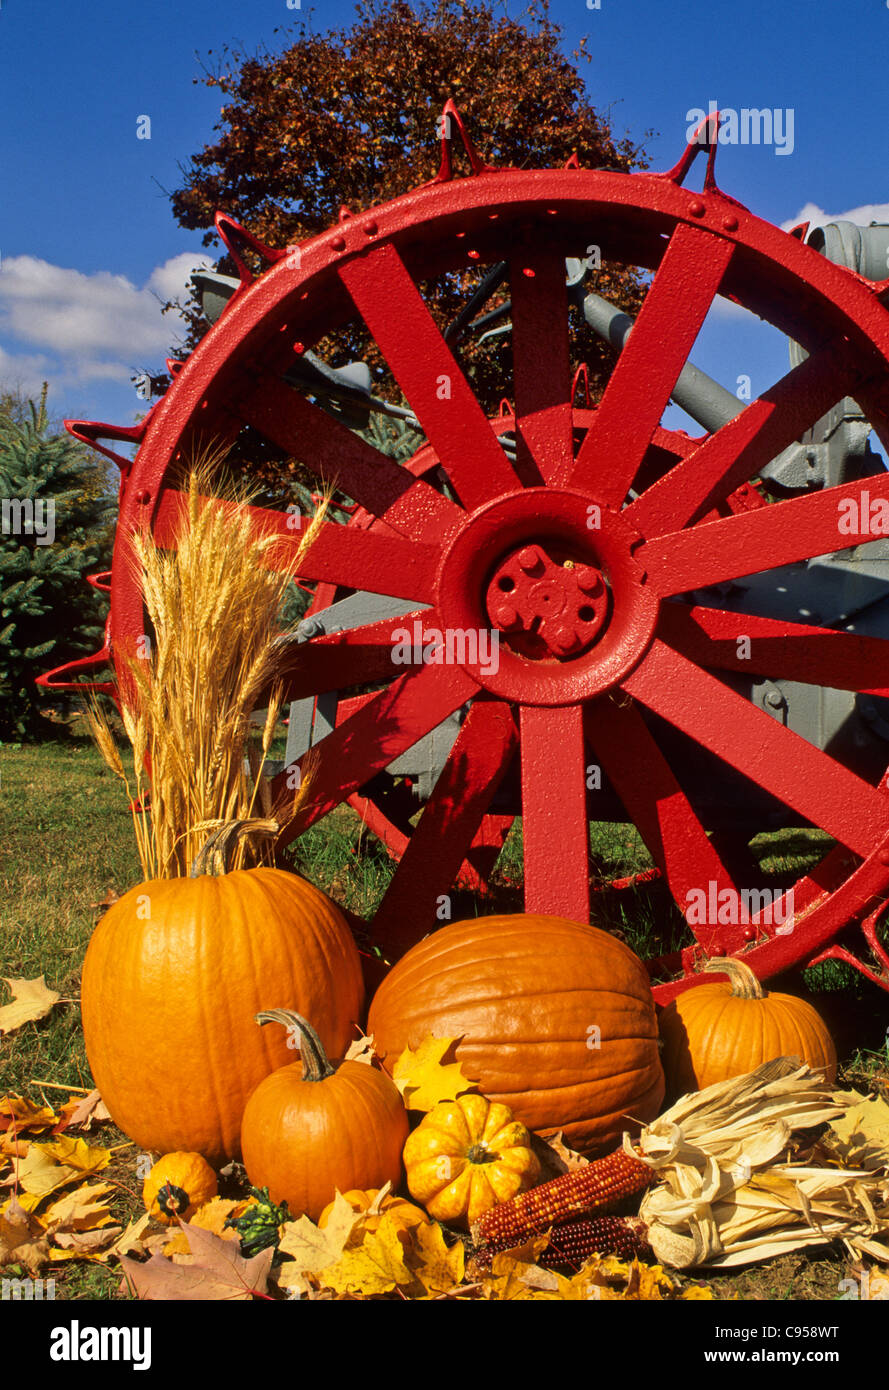 Autumn garden vintage old antique red Fordson tractor wheel abstract, Halloween garden display, New Jersey, USA, Us, United States, munchkins farm Stock Photo